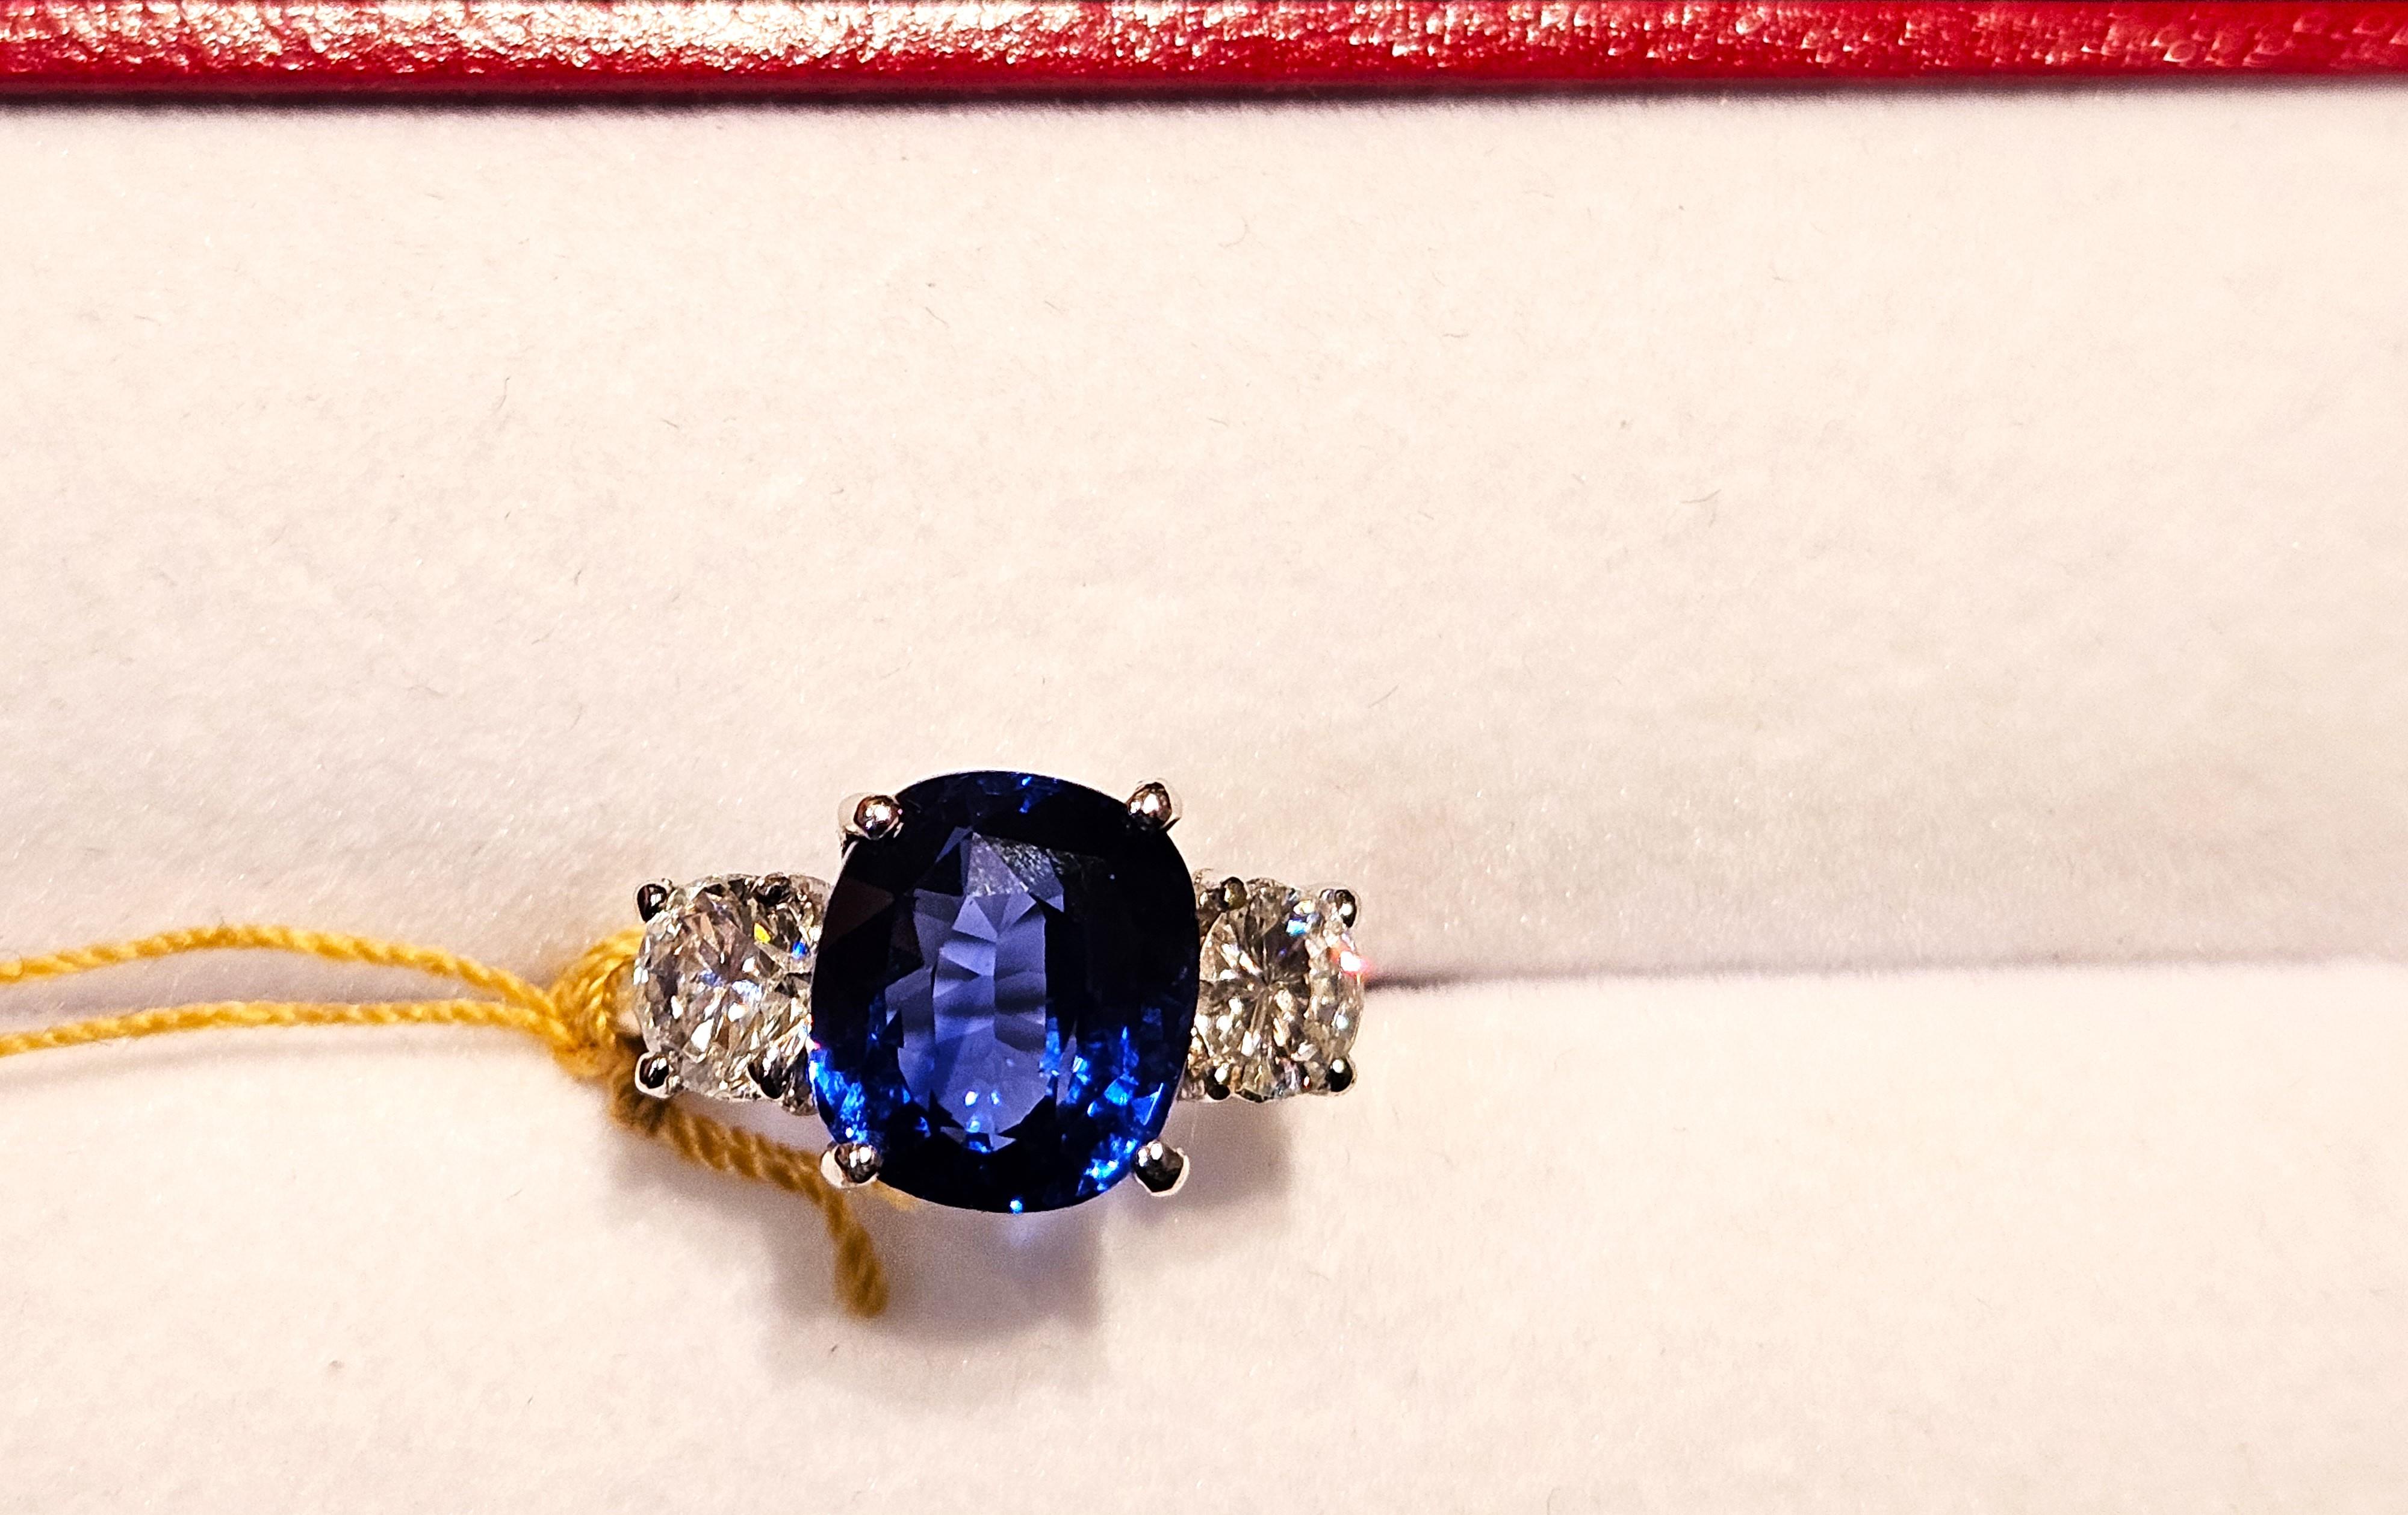 The Following Item we are offering is a Rare Important Spectacular and Brilliant 18KT Gold Large Gorgeous Blue Ceylon Sapphire Diamond Ring. Ring consists of a Rare Fine Magnificent Rare Blue Ceylon Sapphire surrounded with 2 Gorgeous Glittering